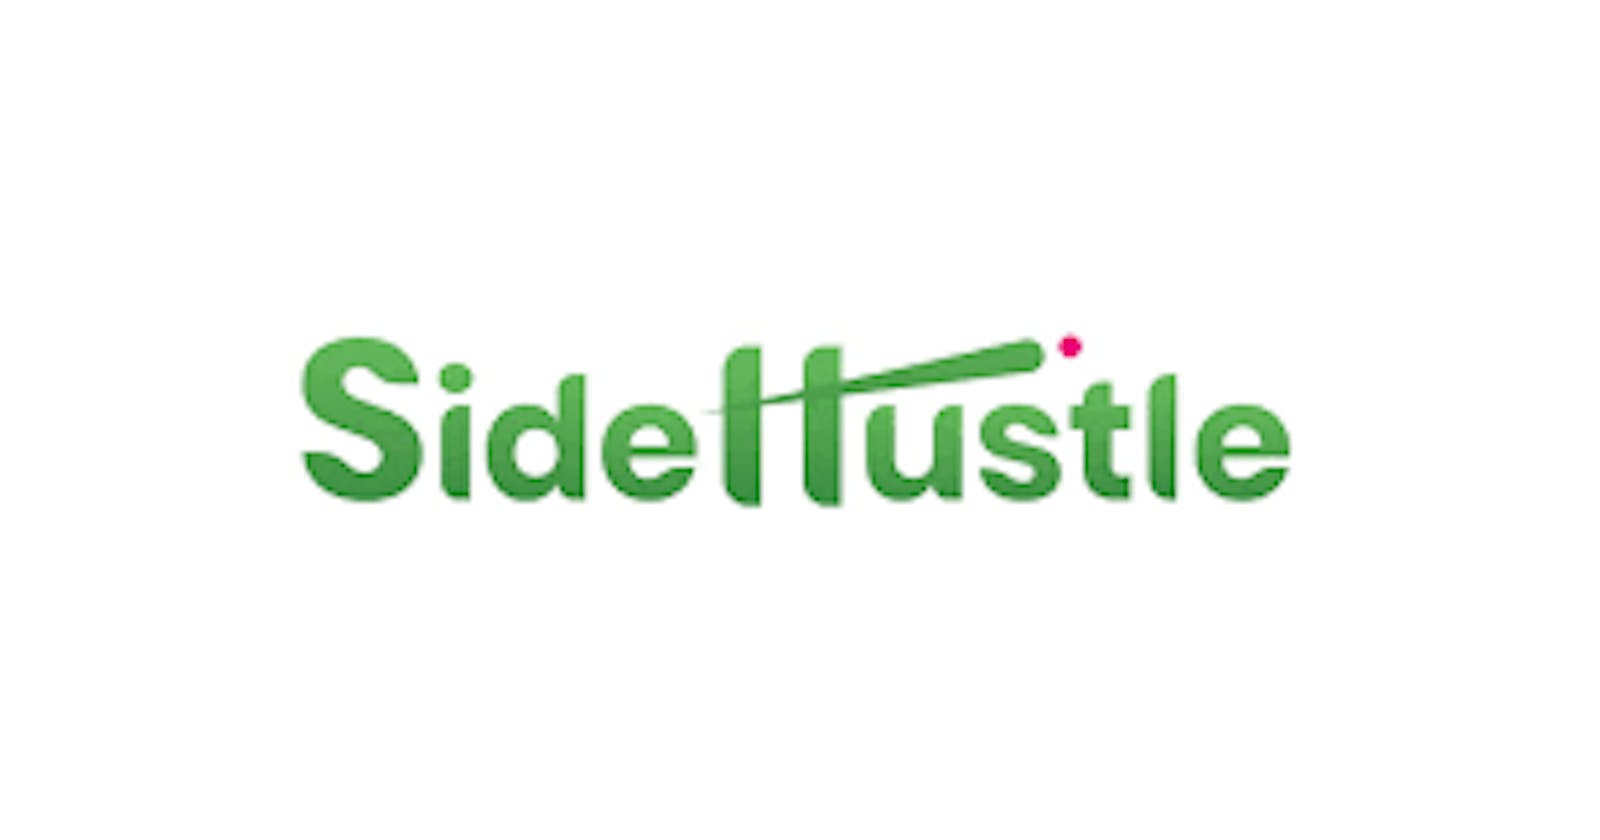 Digital Marketing And Content Creation As A Side Hustle Intern (team 2)